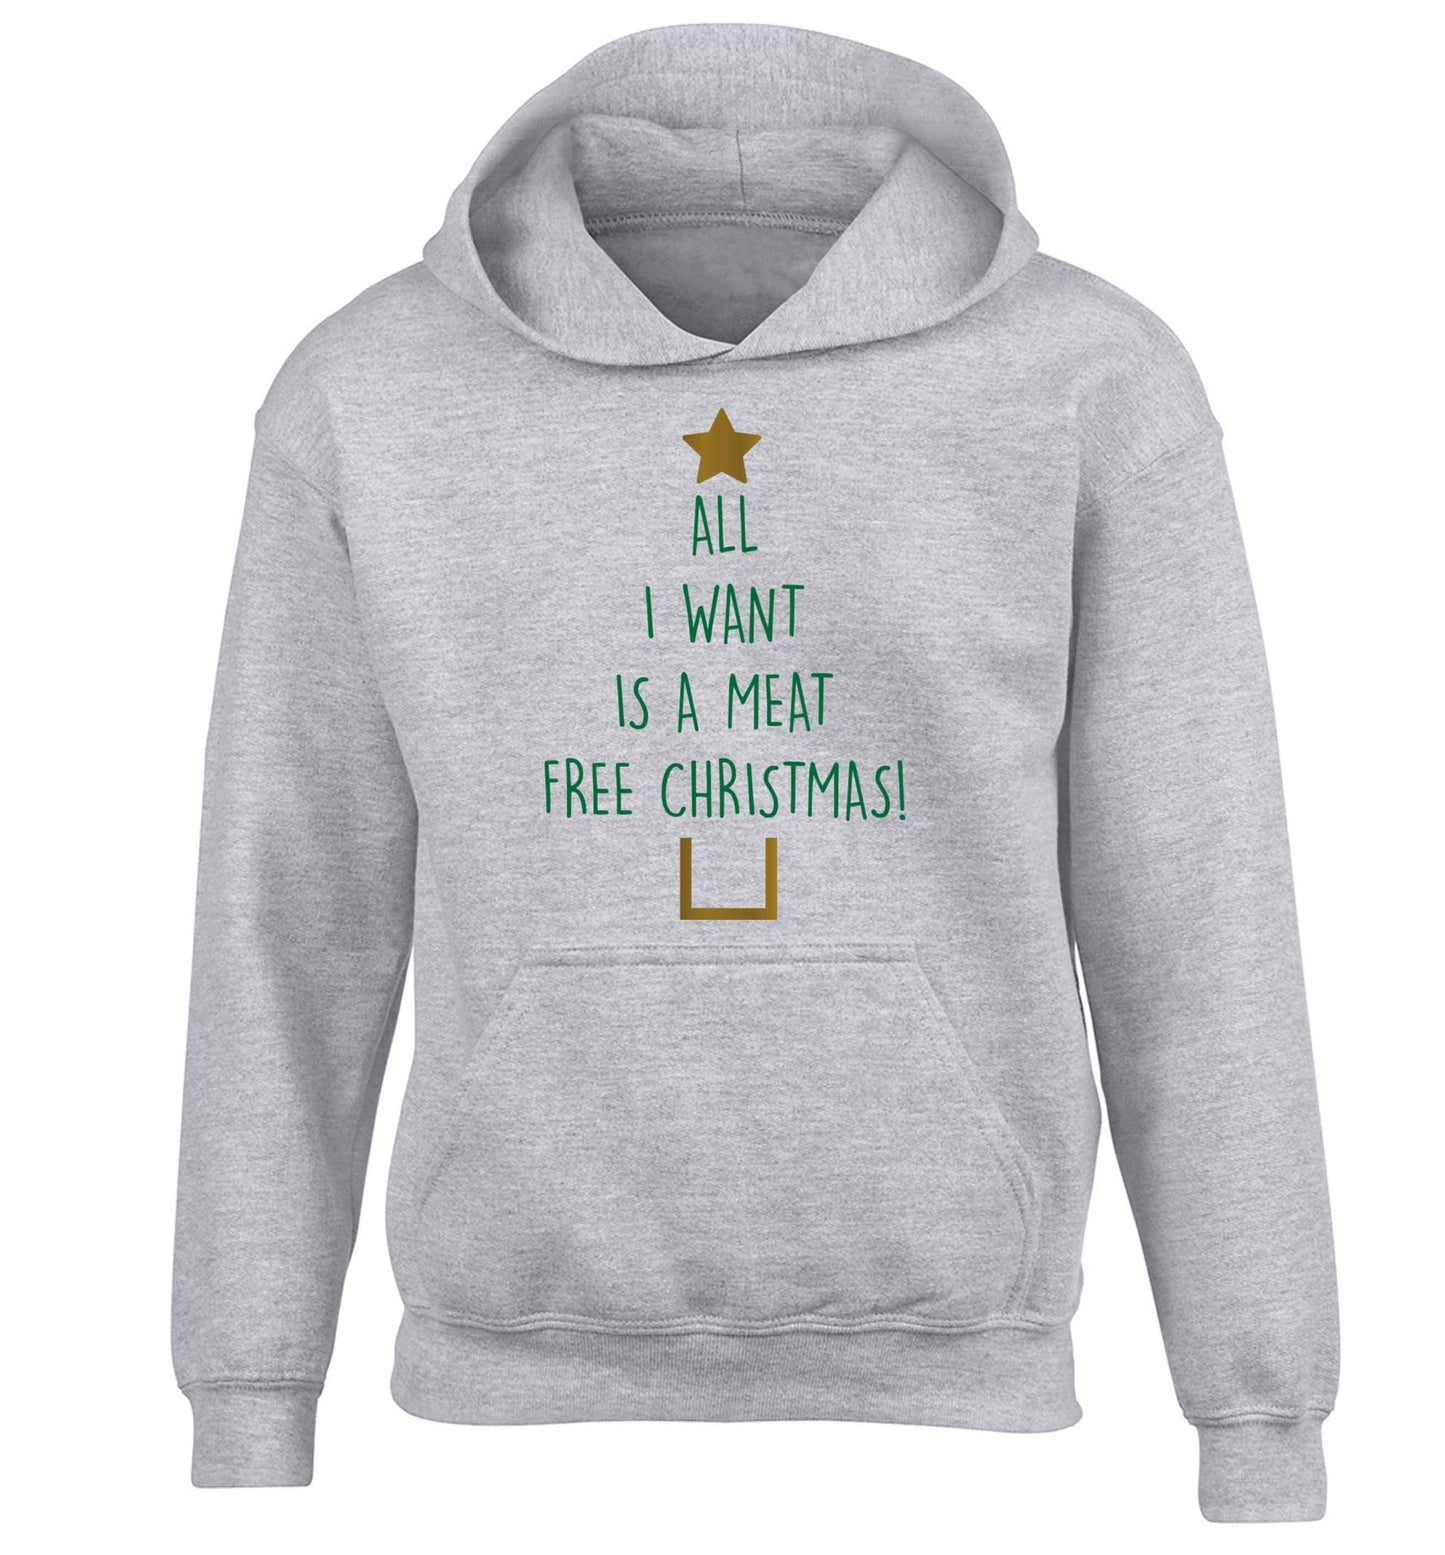 All I want is a meat free Christmas children's grey hoodie 12-13 Years